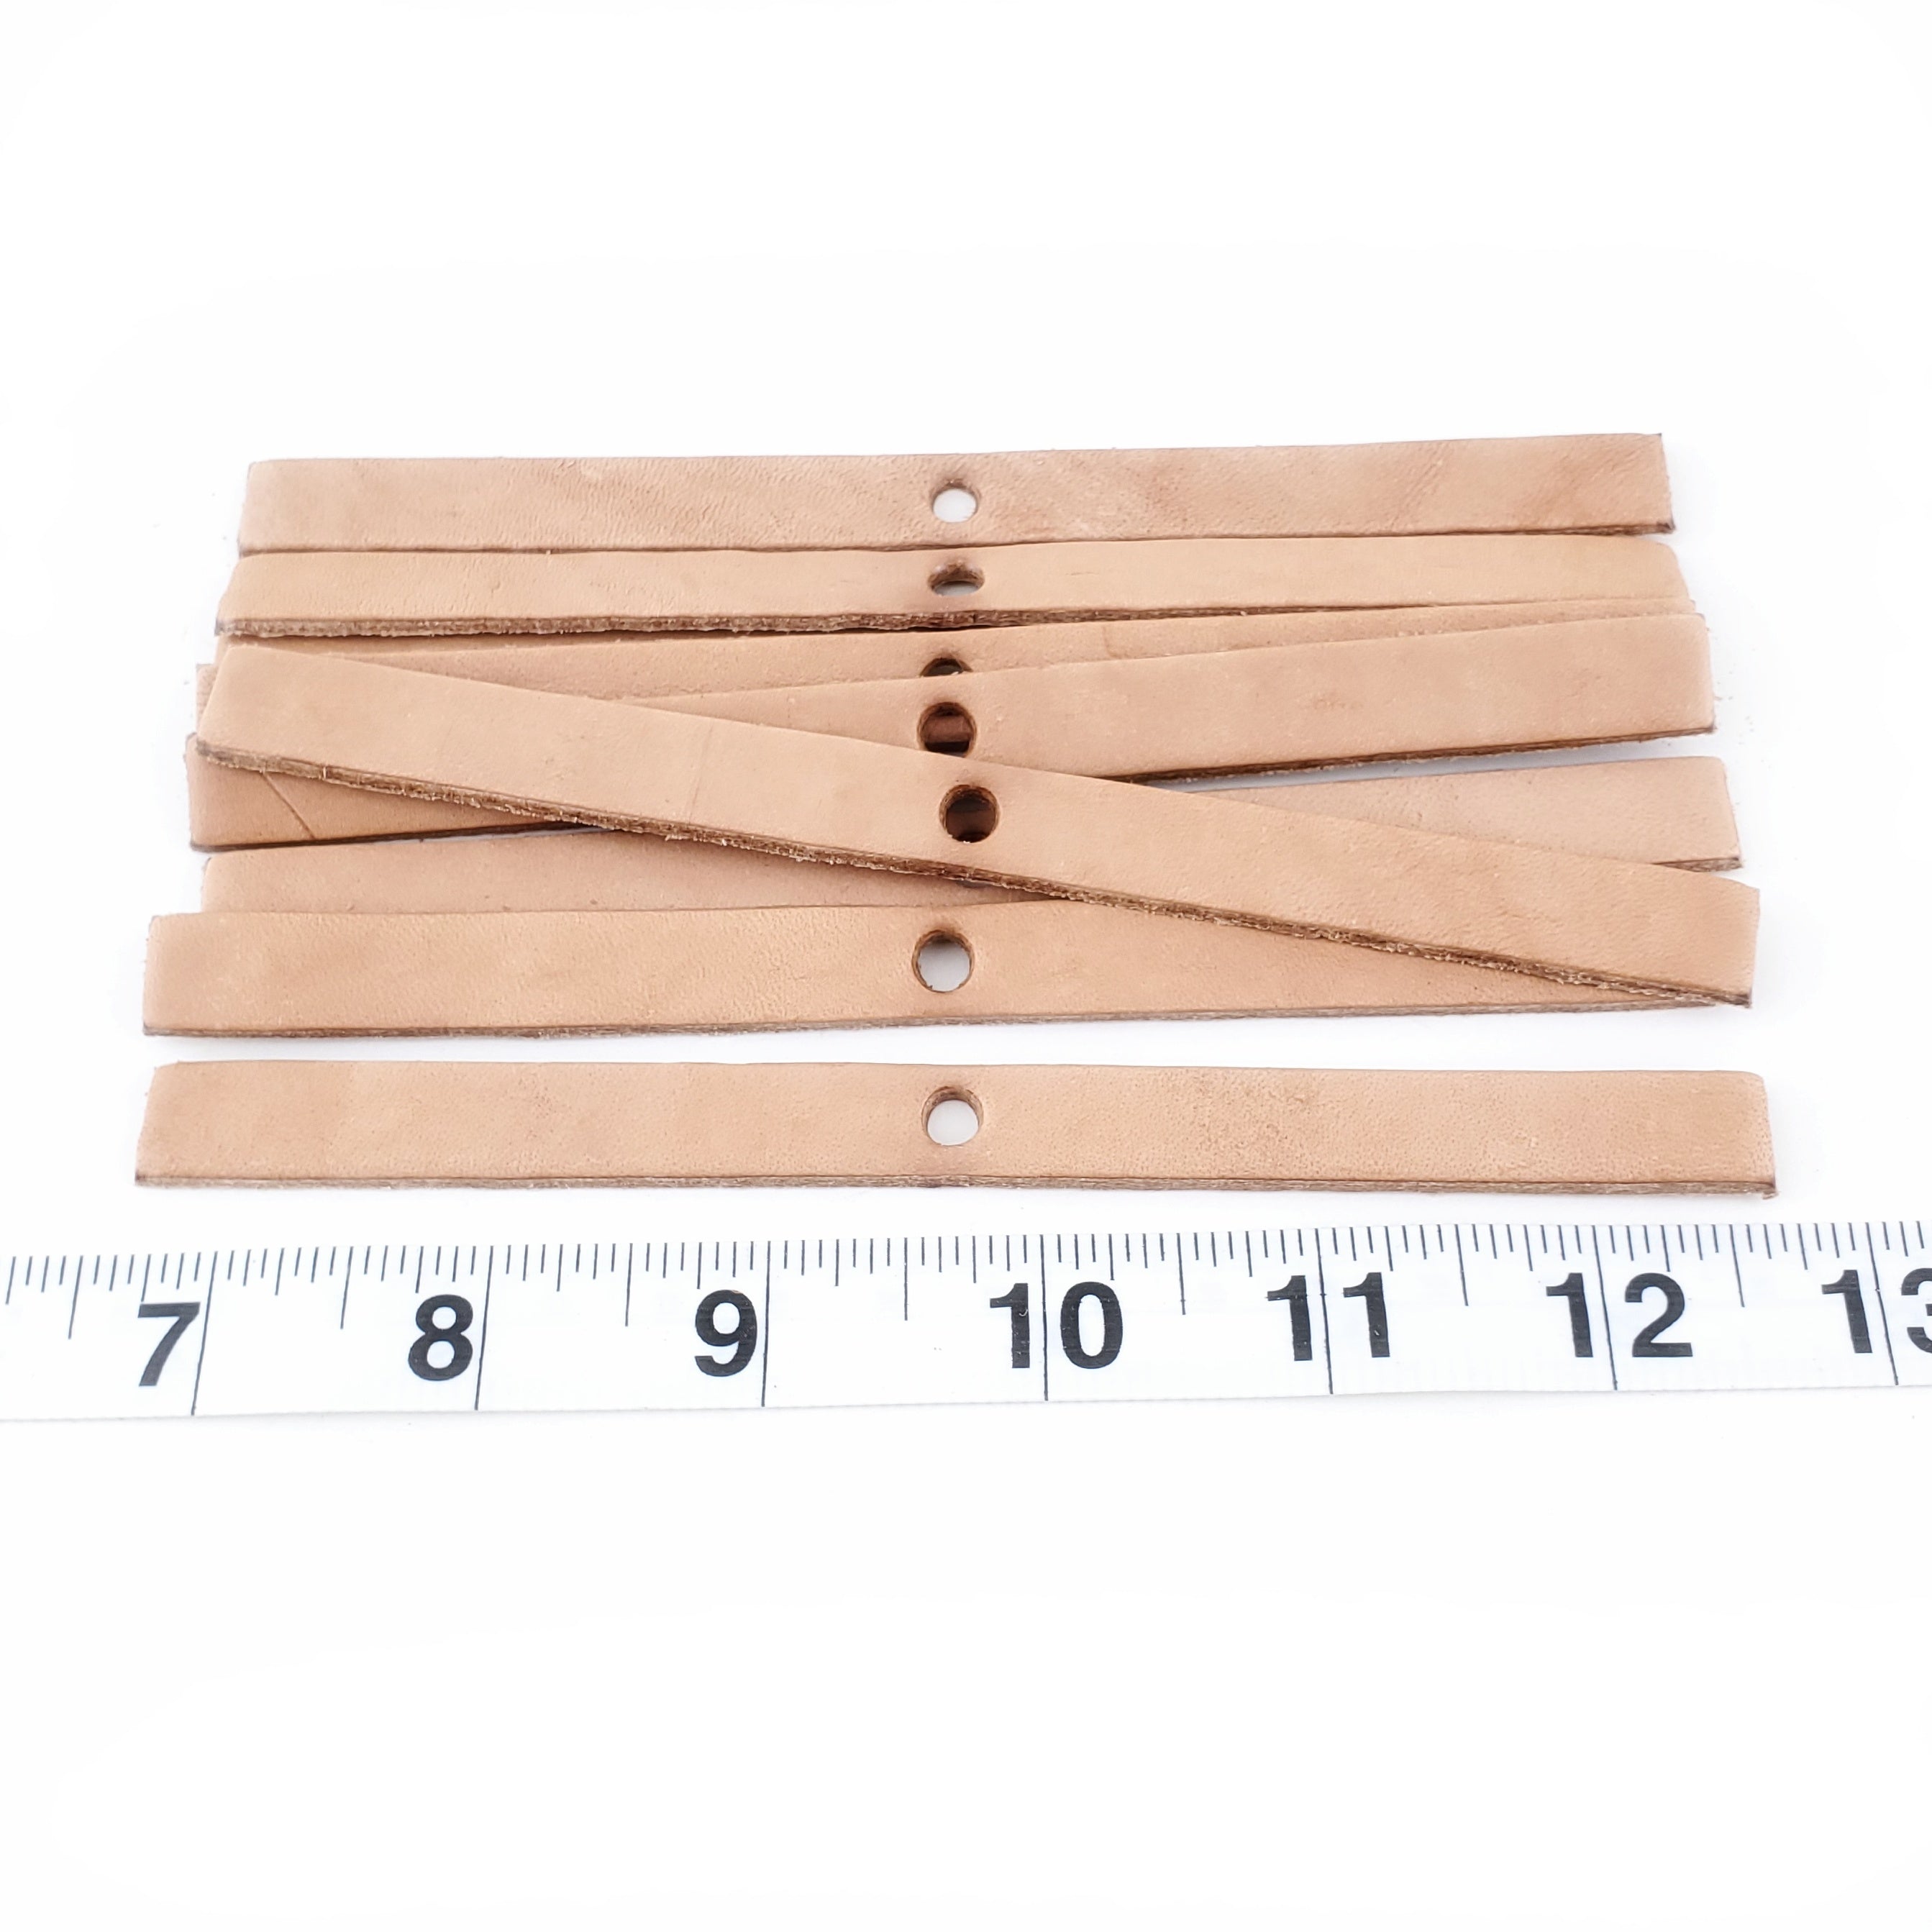 6 Inch Leather Strip with Hole